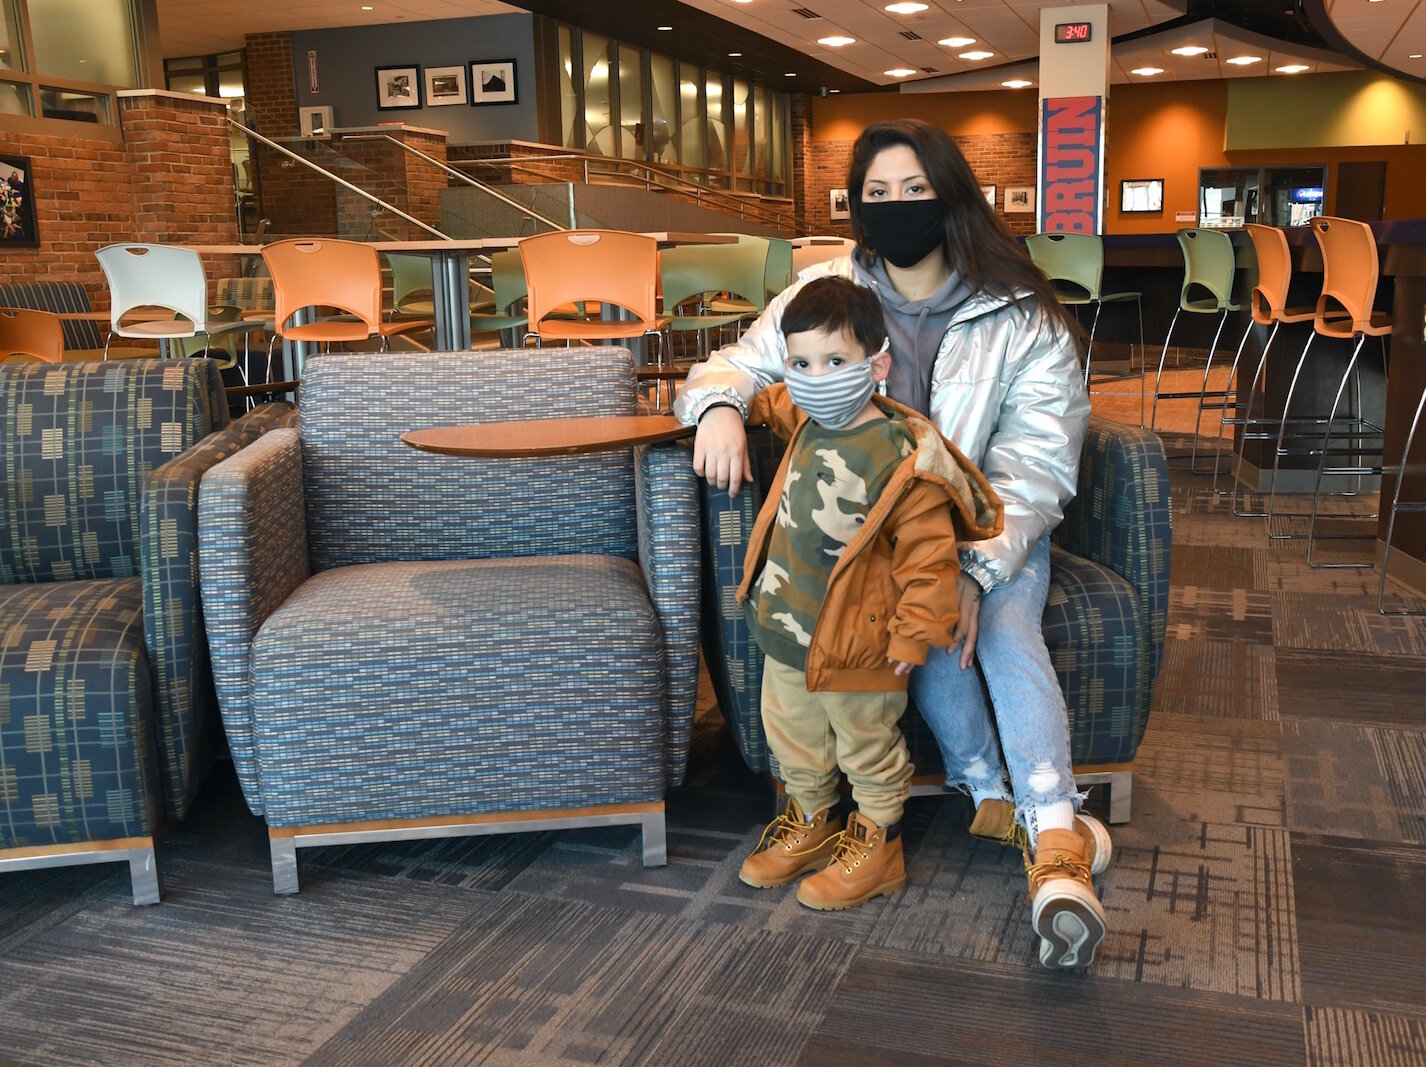 Victoria Fox is seen with her son Sol in the Kellogg Community College student center.